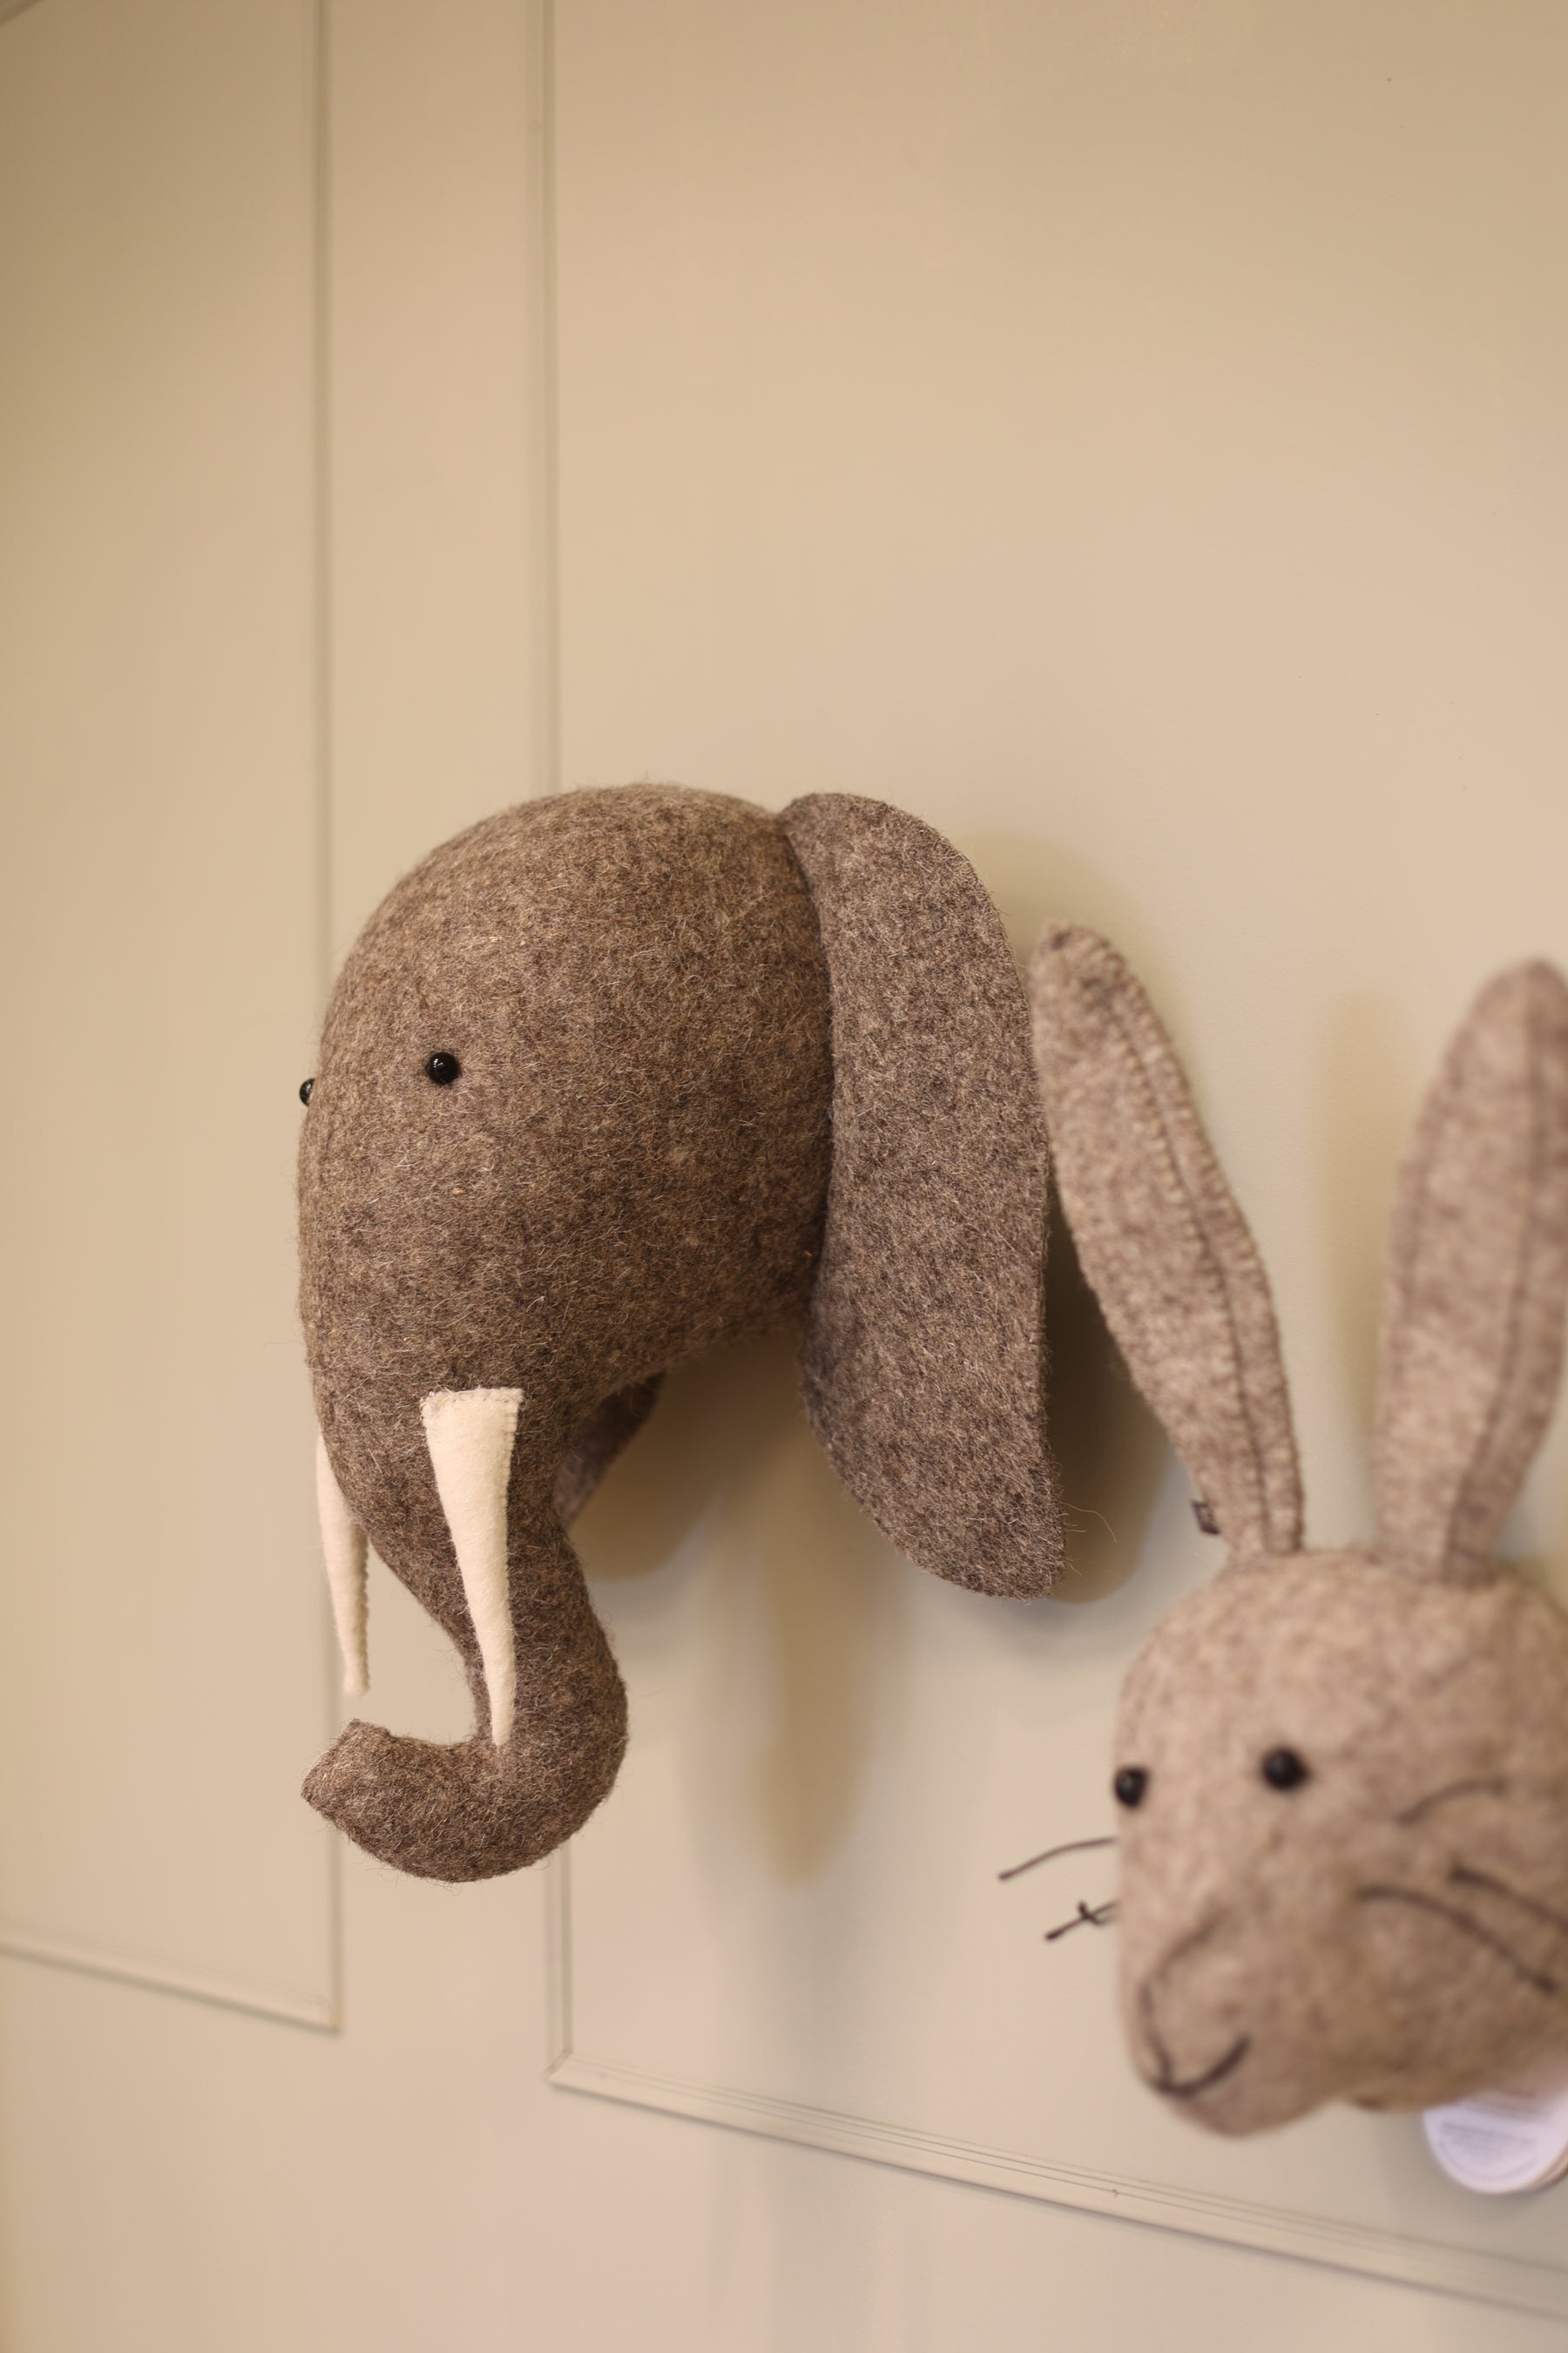 Crafted with love by Fiona Walker: Create a magical nursery with your favorite animal decor